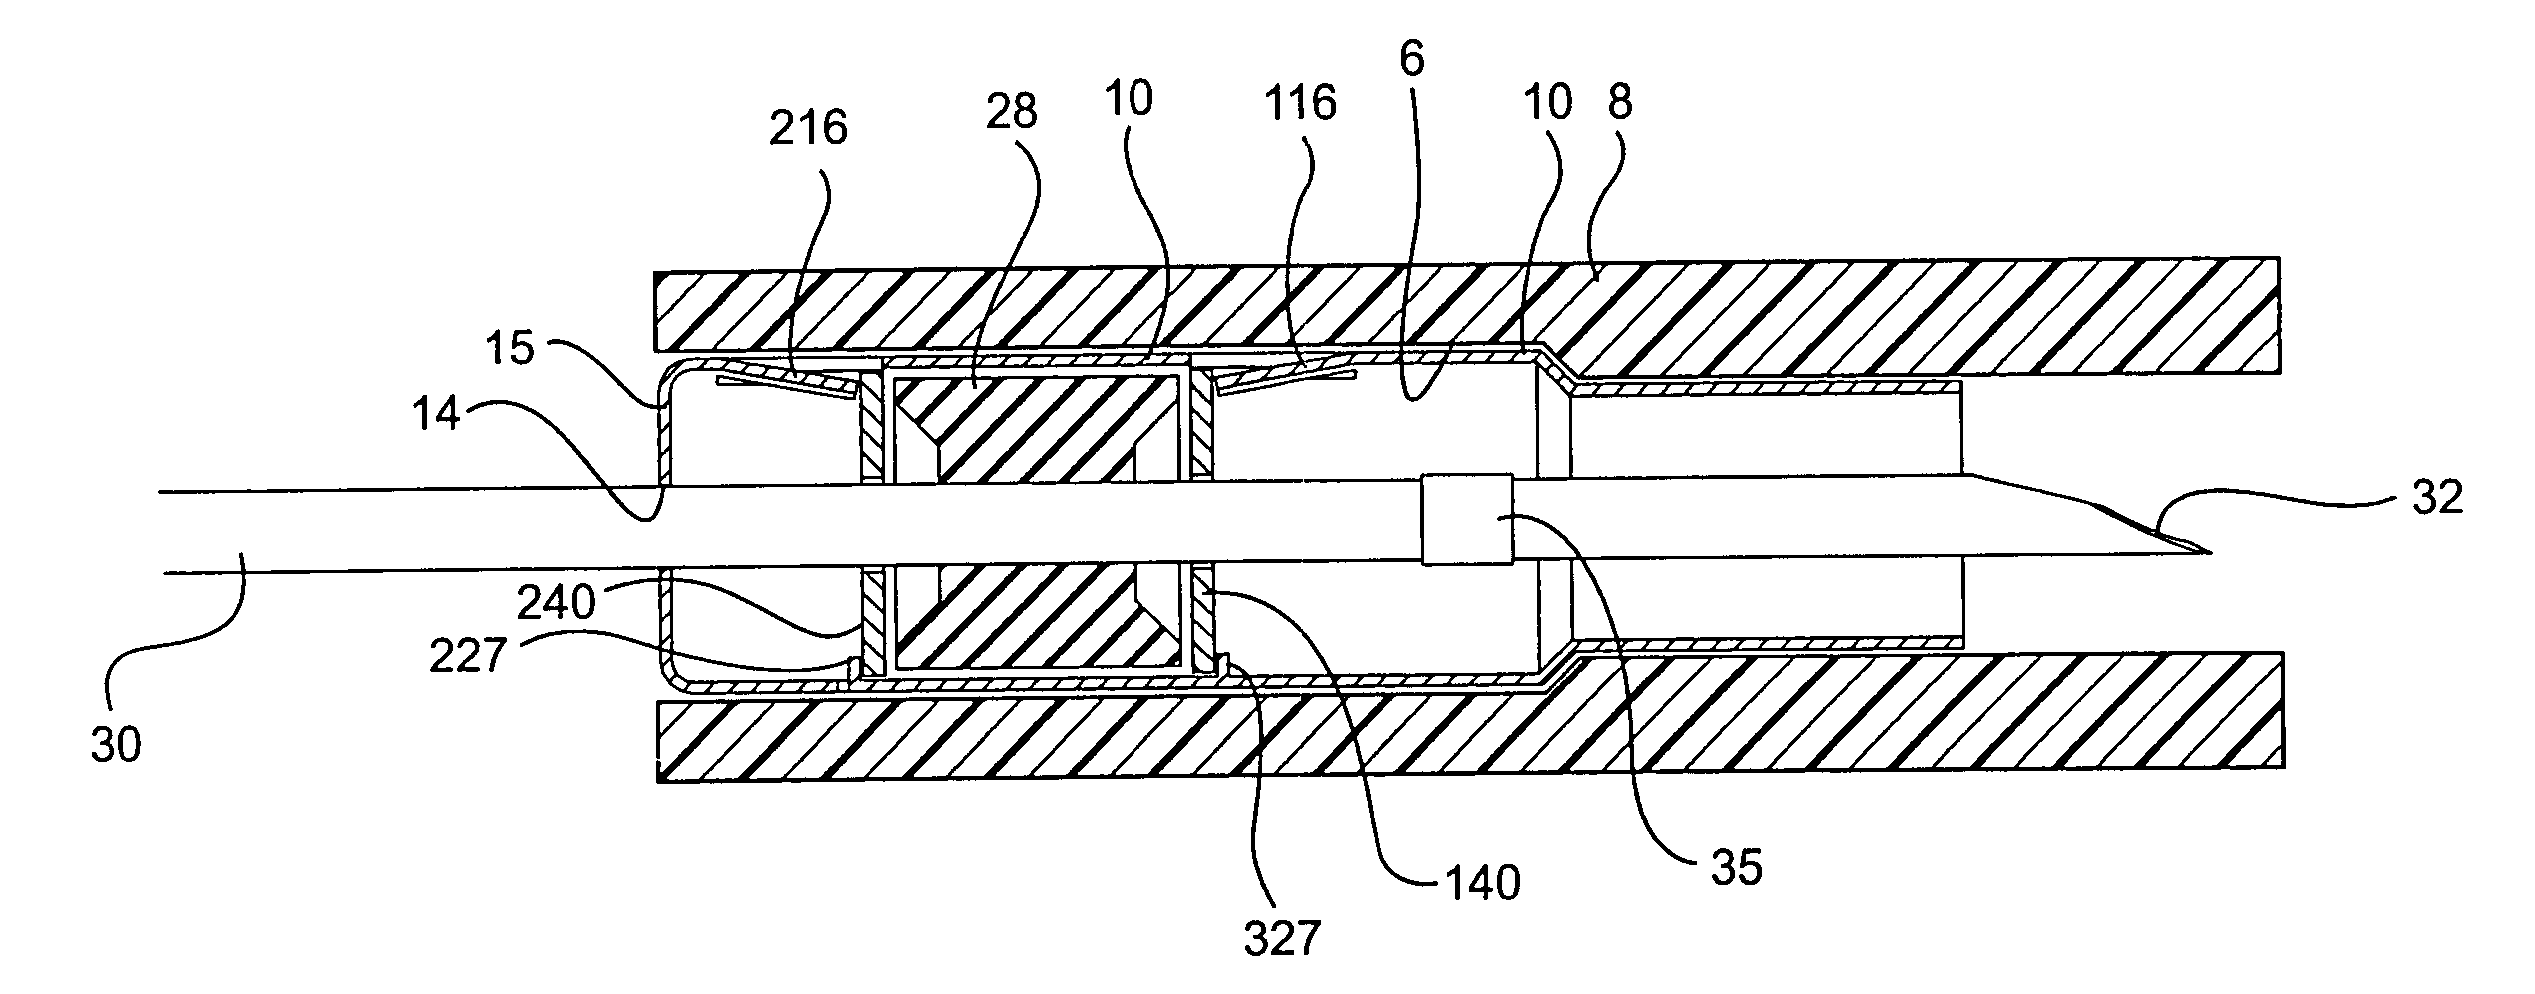 Catheter and introducer needle assembly with needle shield